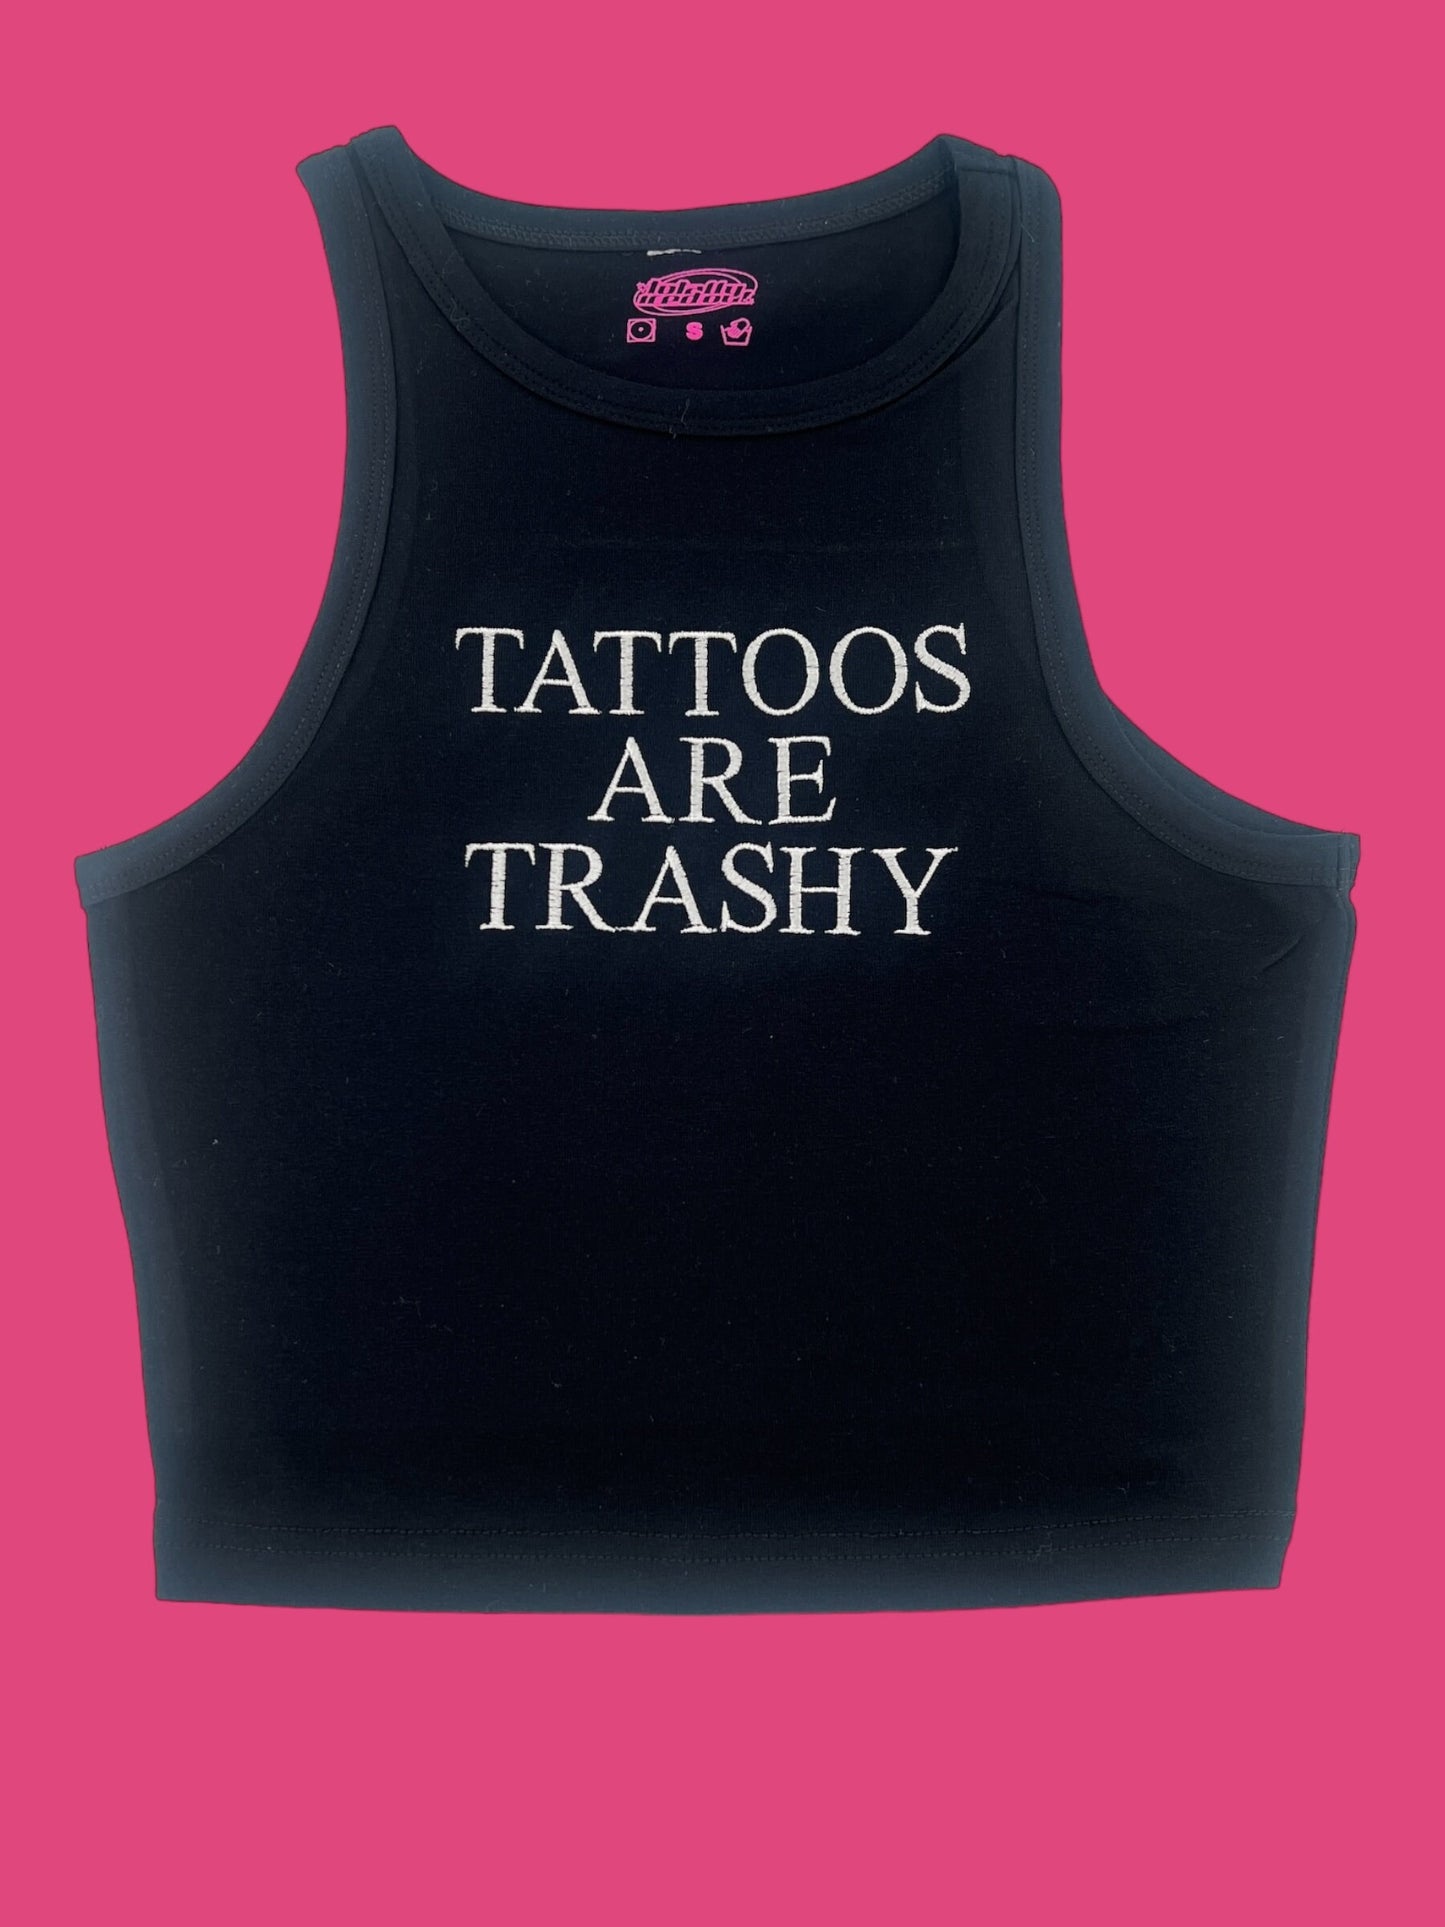 a black tank top that says tattoos are trashy